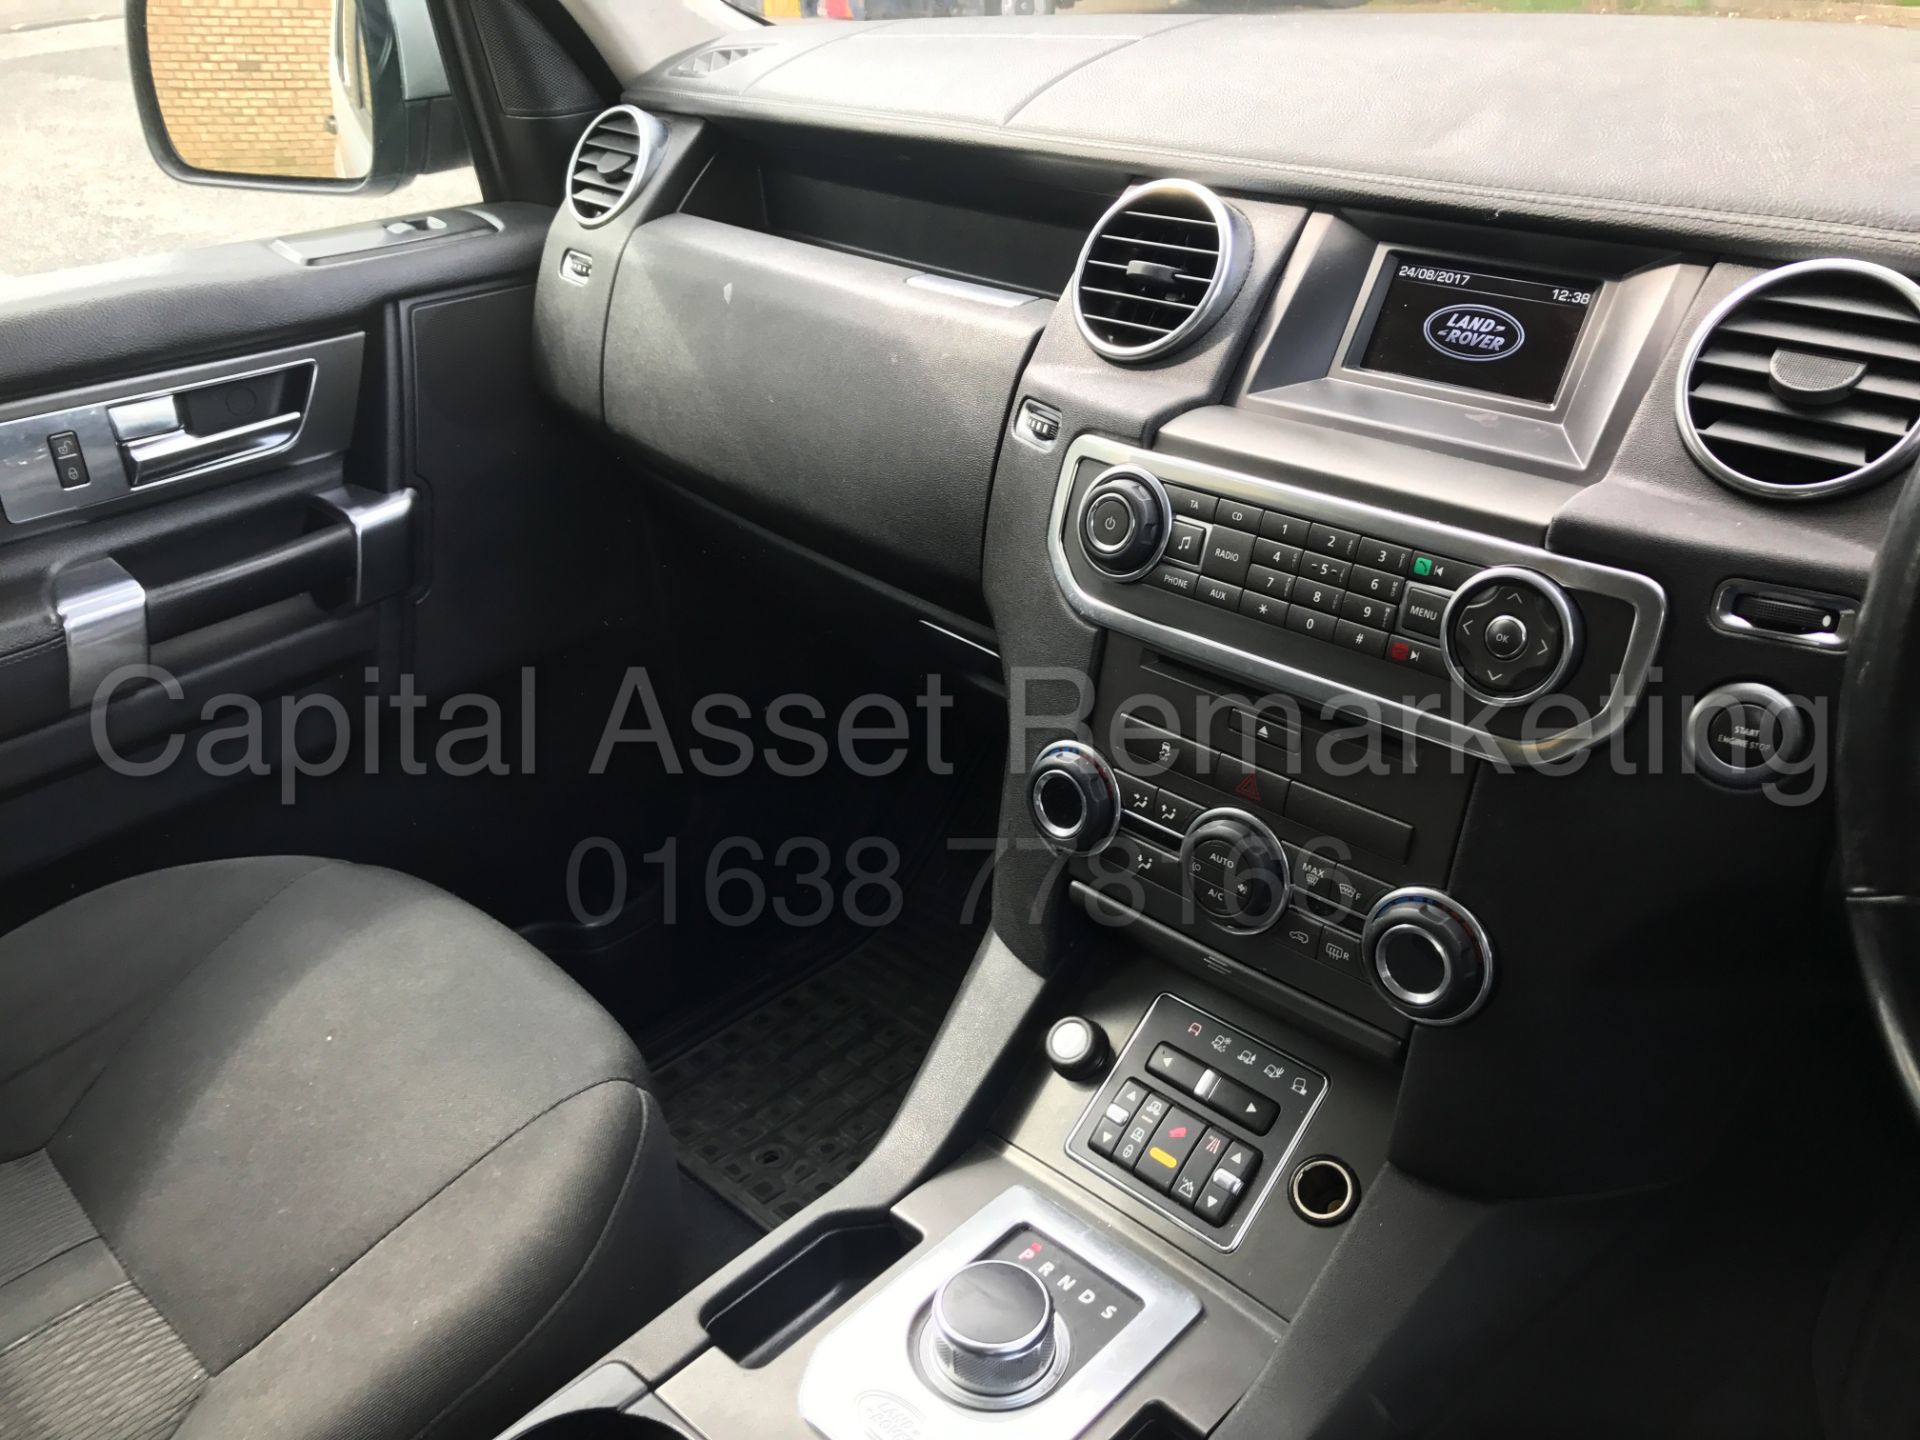 (On Sale) LAND ROVER DISCOVERY 4 (2012) '3.0 SDV6 - 8 SPEED AUTO - 7 SEATER' **HUGE SPEC** (1 OWNER) - Image 26 of 33